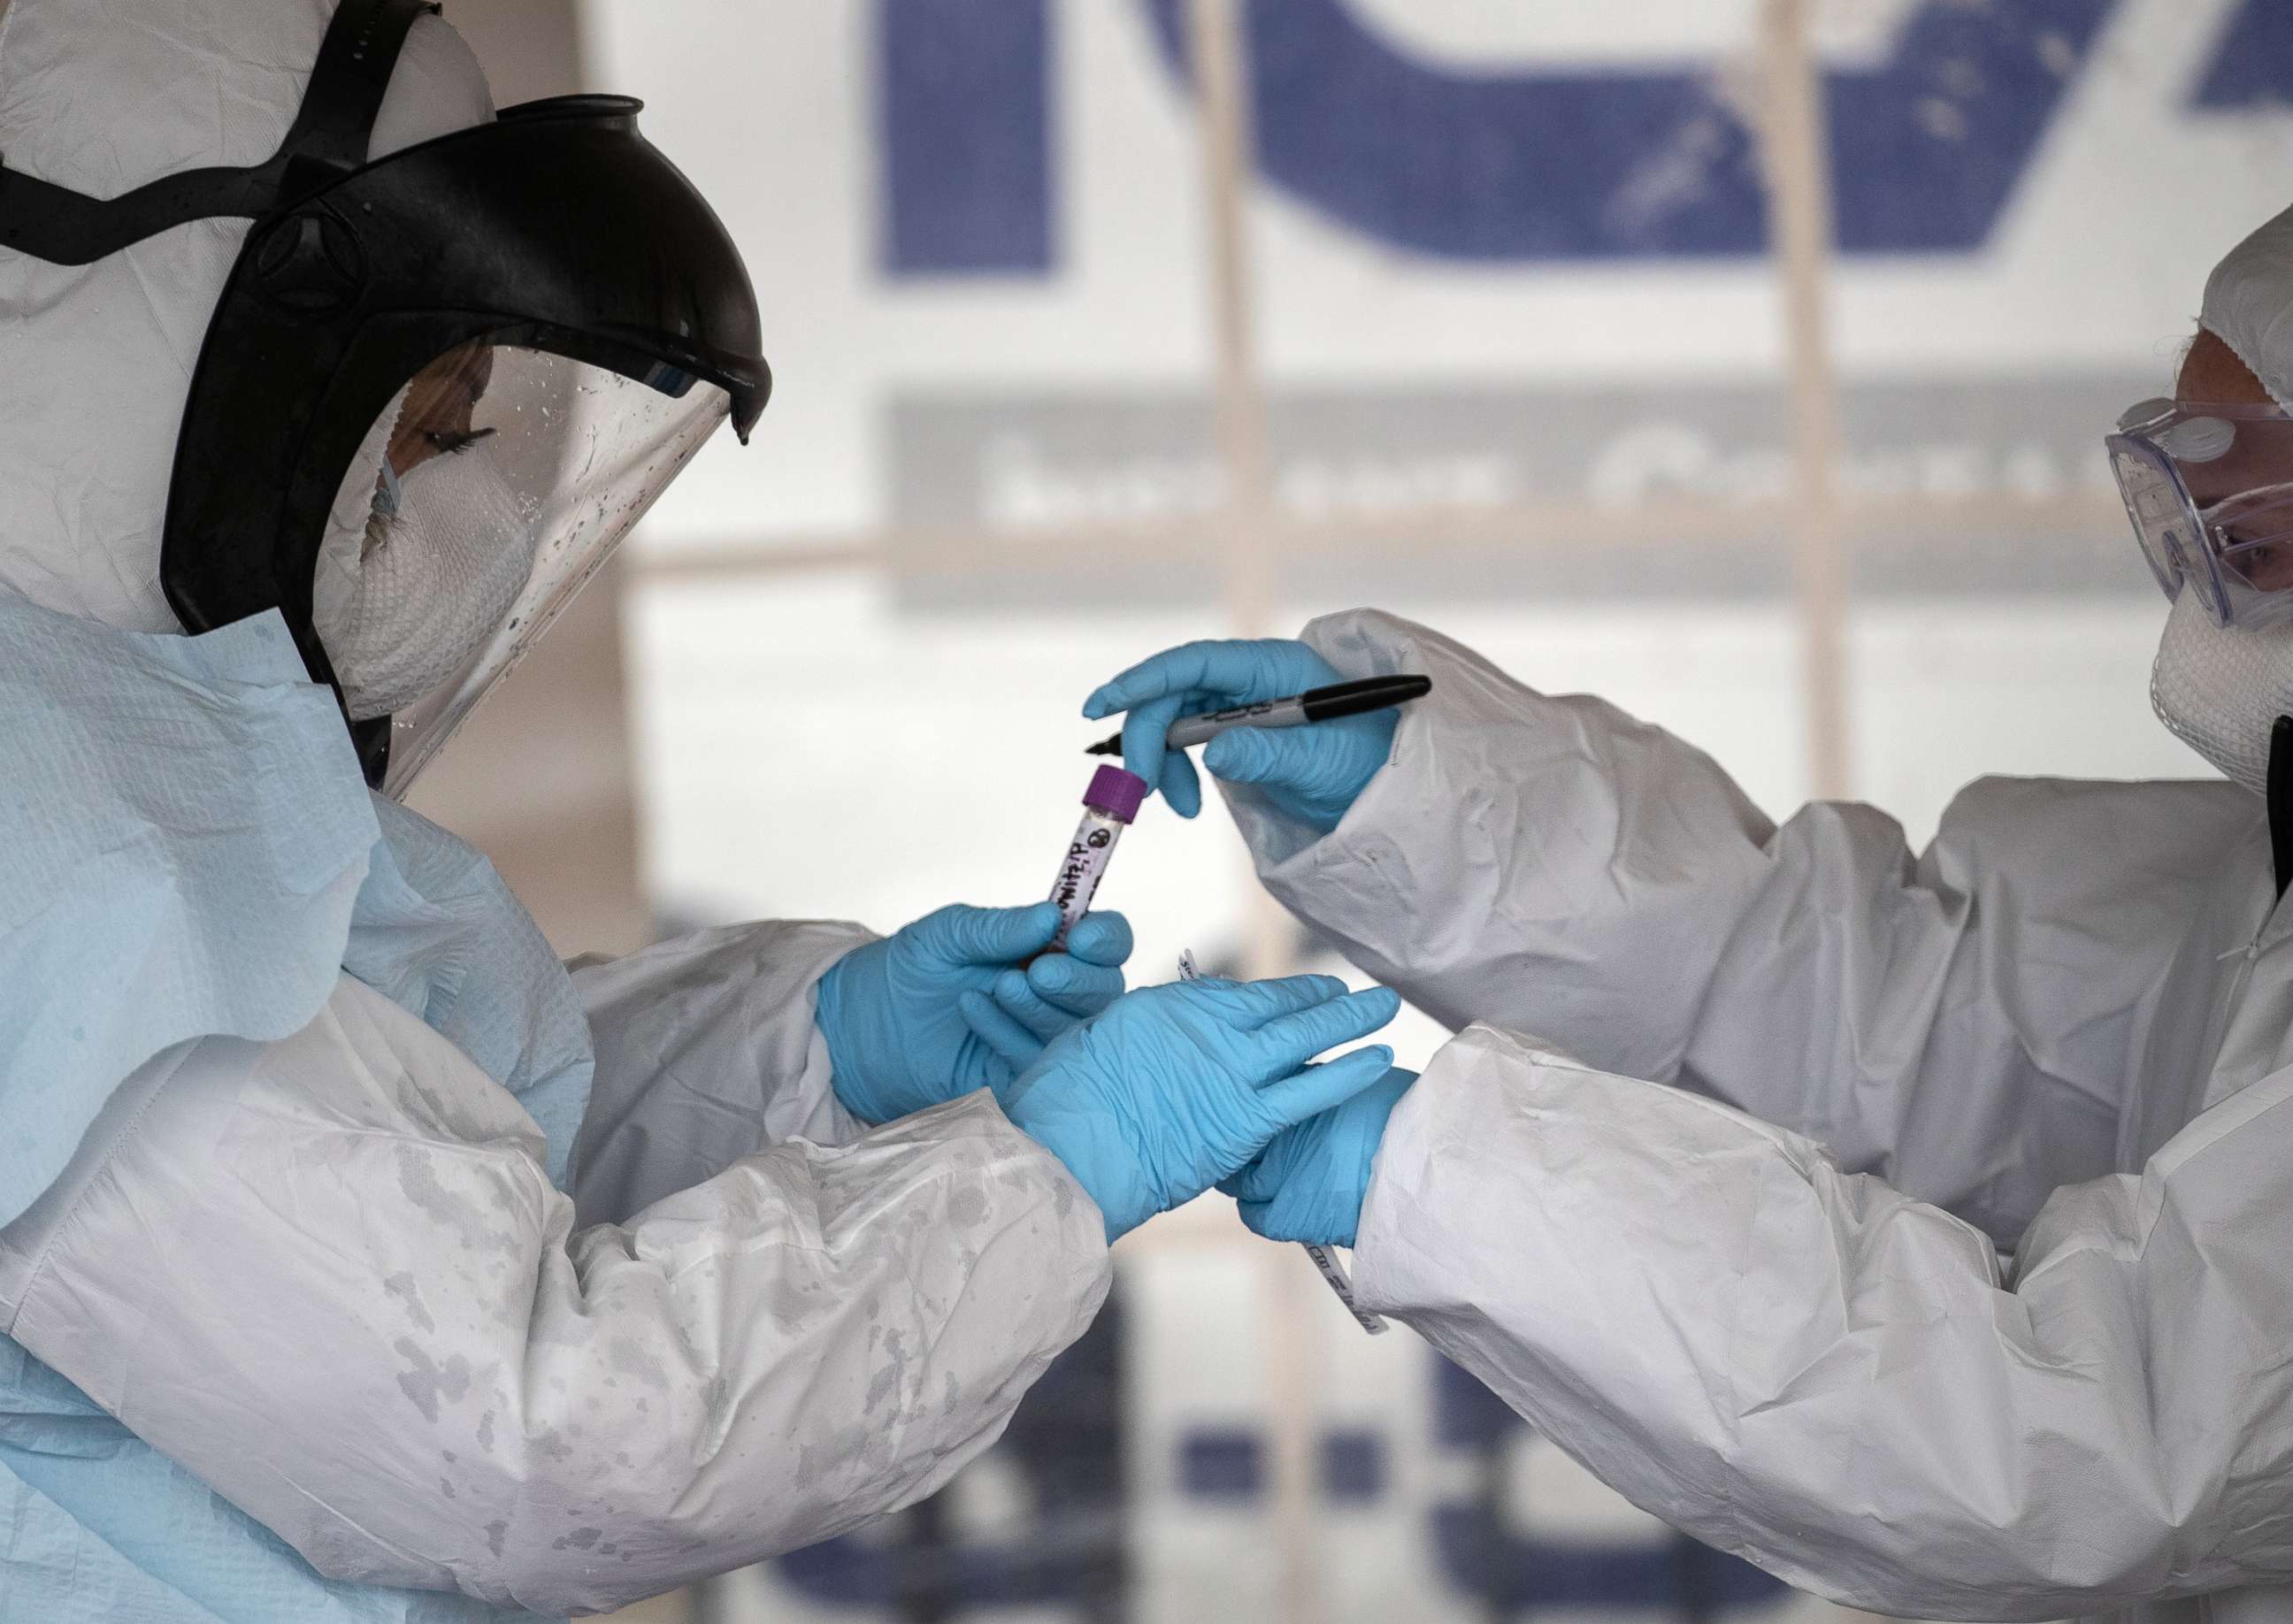 PHOTO: Health workers dressed in personal protective equipment (PPE) handle a coronavirus test at a drive-thru testing station at Cummings Park on March 23, 2020 in Stamford, Connecticut.